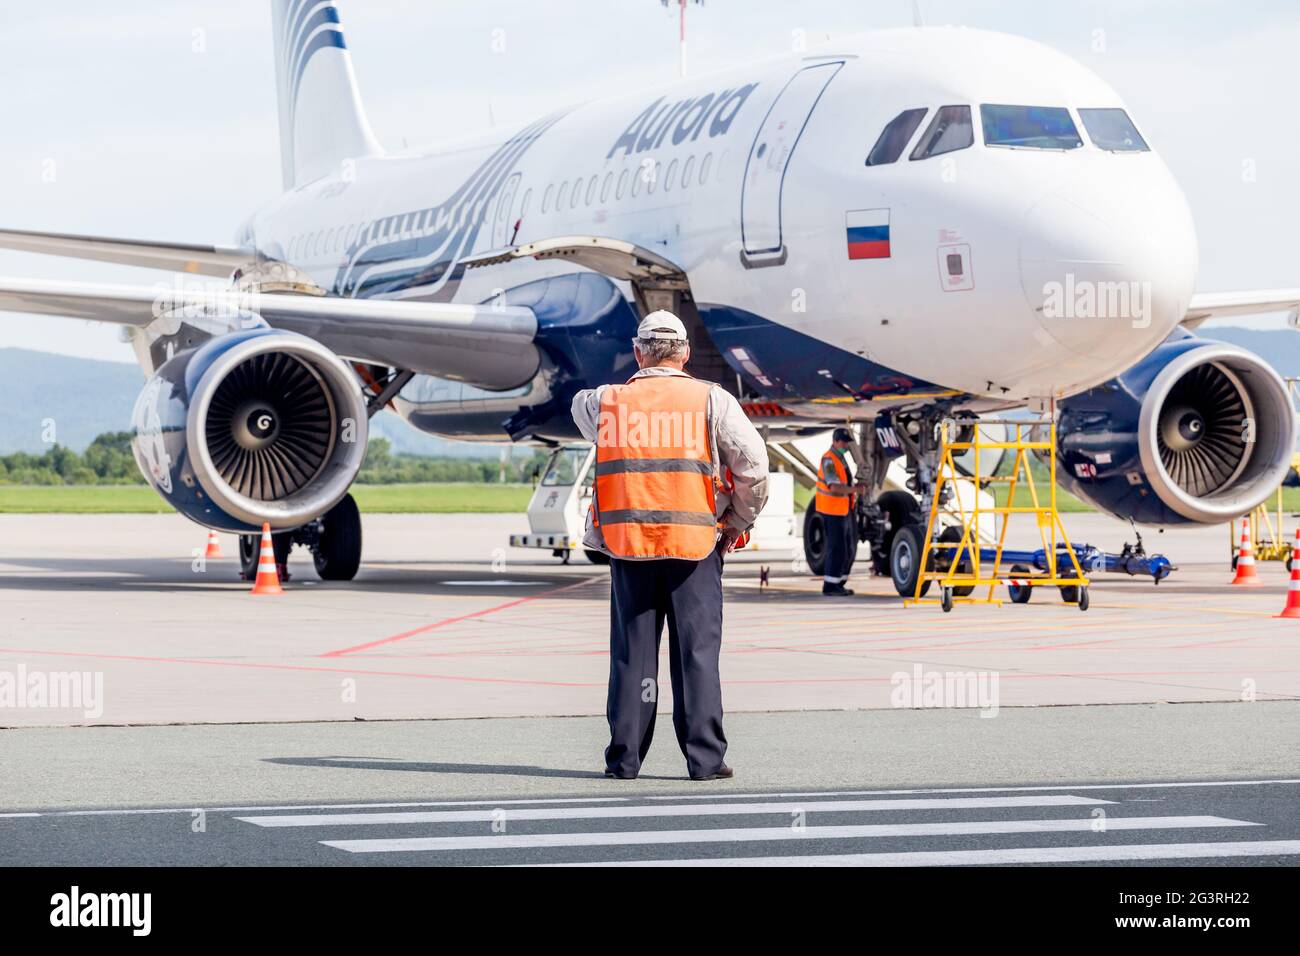 Russia, Vladivostok, 08/17/2020. Passenger jet Airbus A319 of Aurora Airlines check before taking off. Plane maintenance and ser Stock Photo